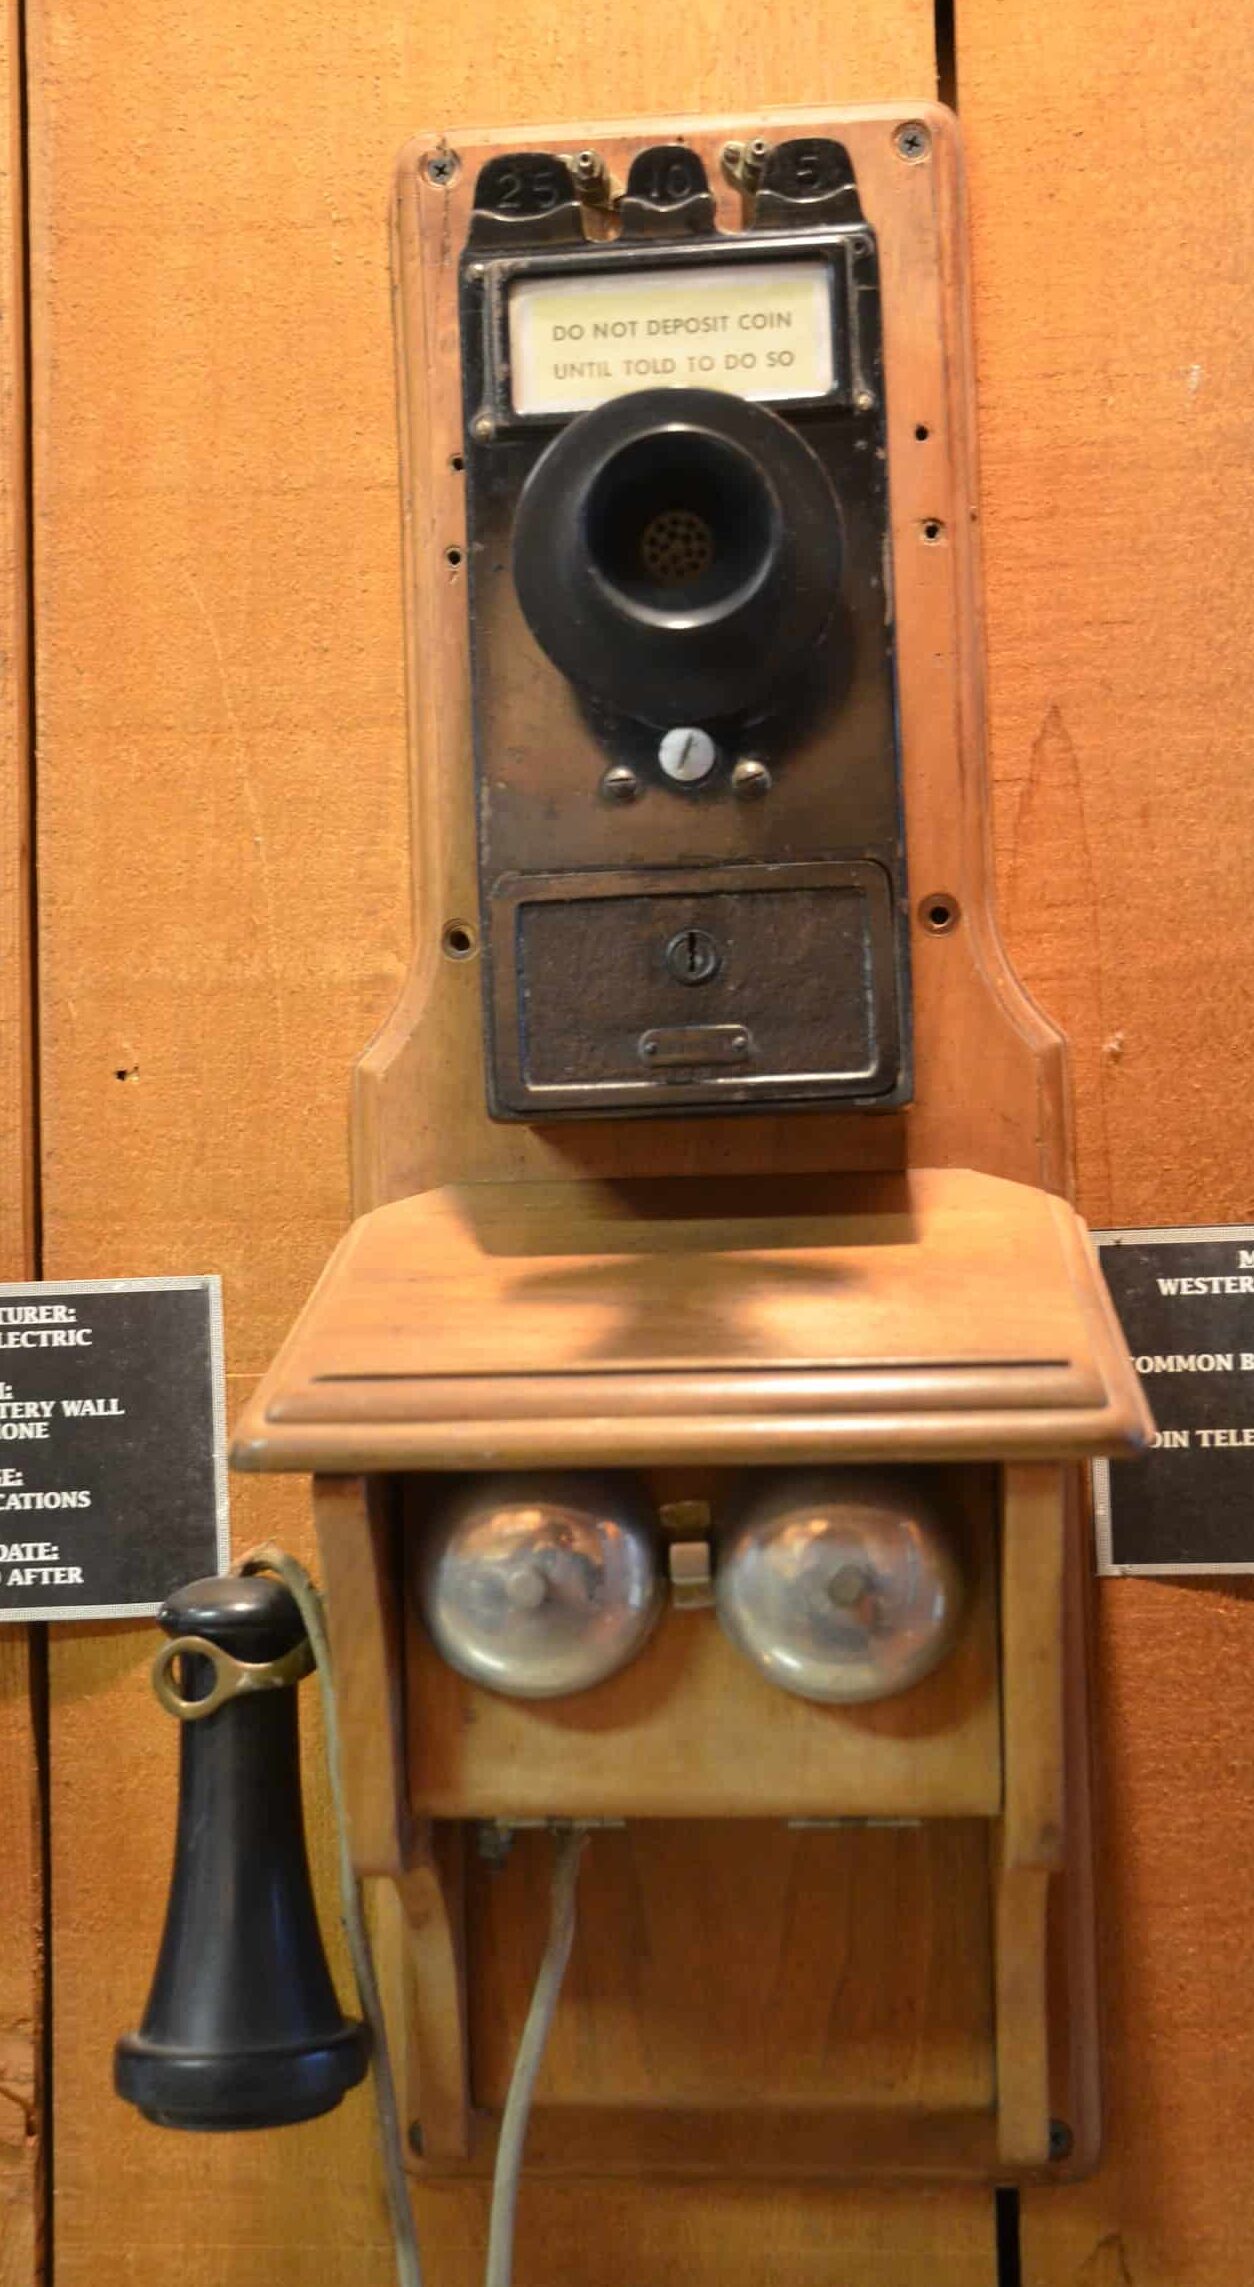 Western Electric common battery wall telephone (used 1921 and after) at the E.H. Danner Museum of Telephony